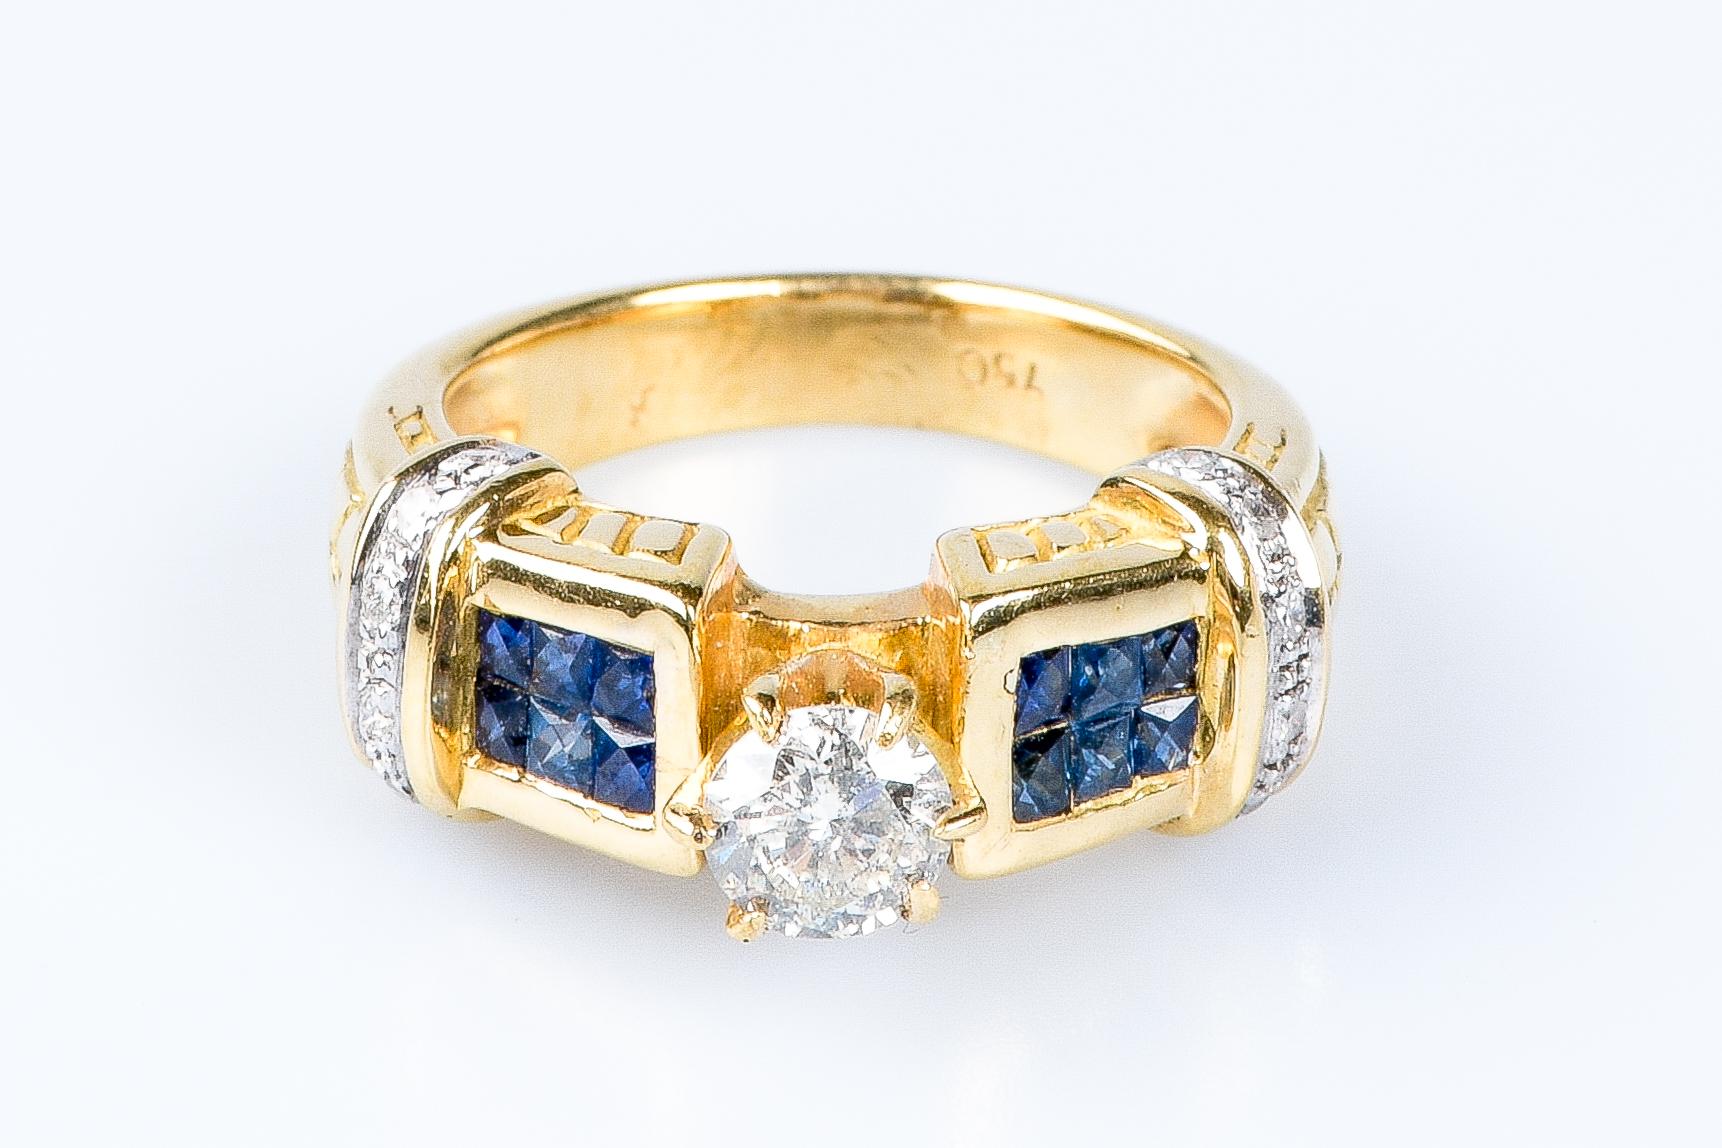 18 carat yellow gold ring designed with 1 round brillant cut diamond weighing 0.40 carats, 12 baguette cut sapphires weighing 0.24 carats and 12 round brillant cut diamonds weighing 0.12 carats.

Quality of the diamond
Color : H
Clarity : SI

